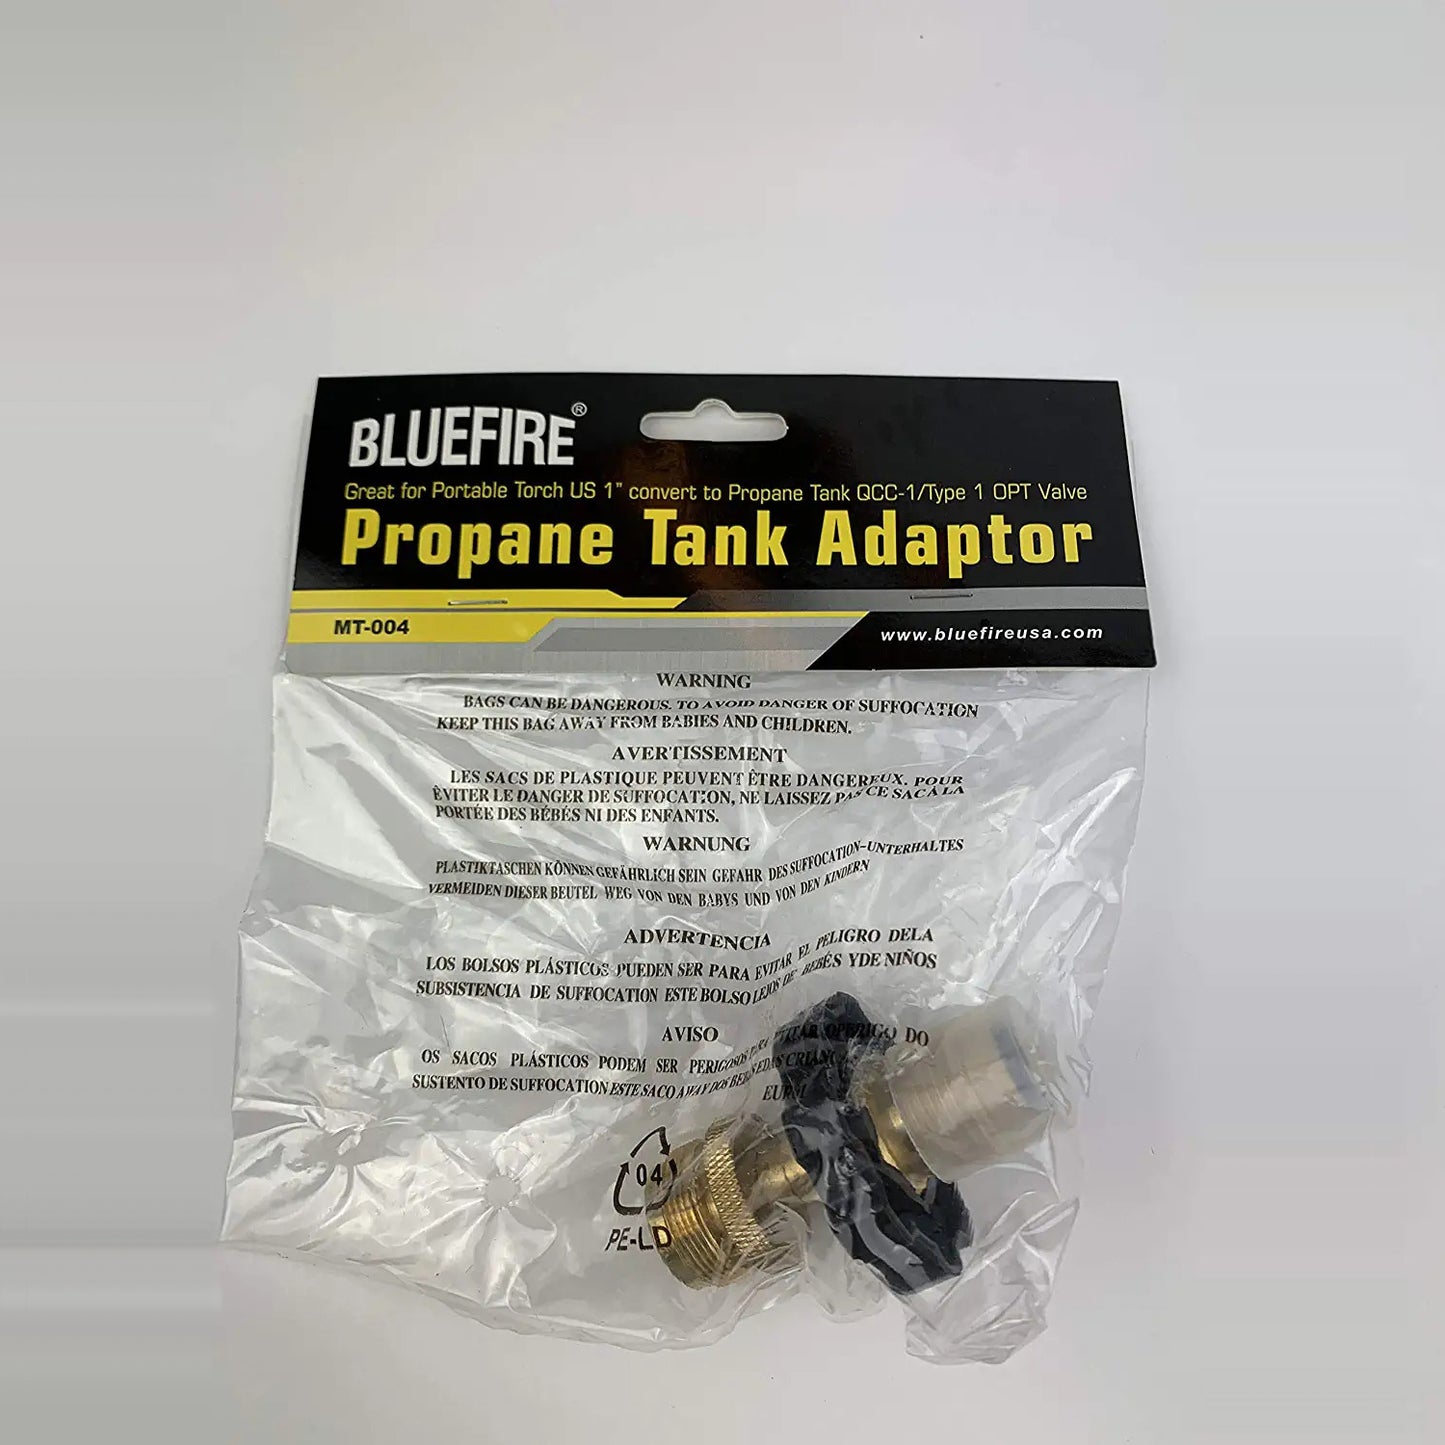 MT-004 Universal Fit Propane Tank Adapter Convert POL QCC1 Type 1 to CGA 600 Connect 20 lb LP Service Valve to Fuel on 1lb Gas Cylinder